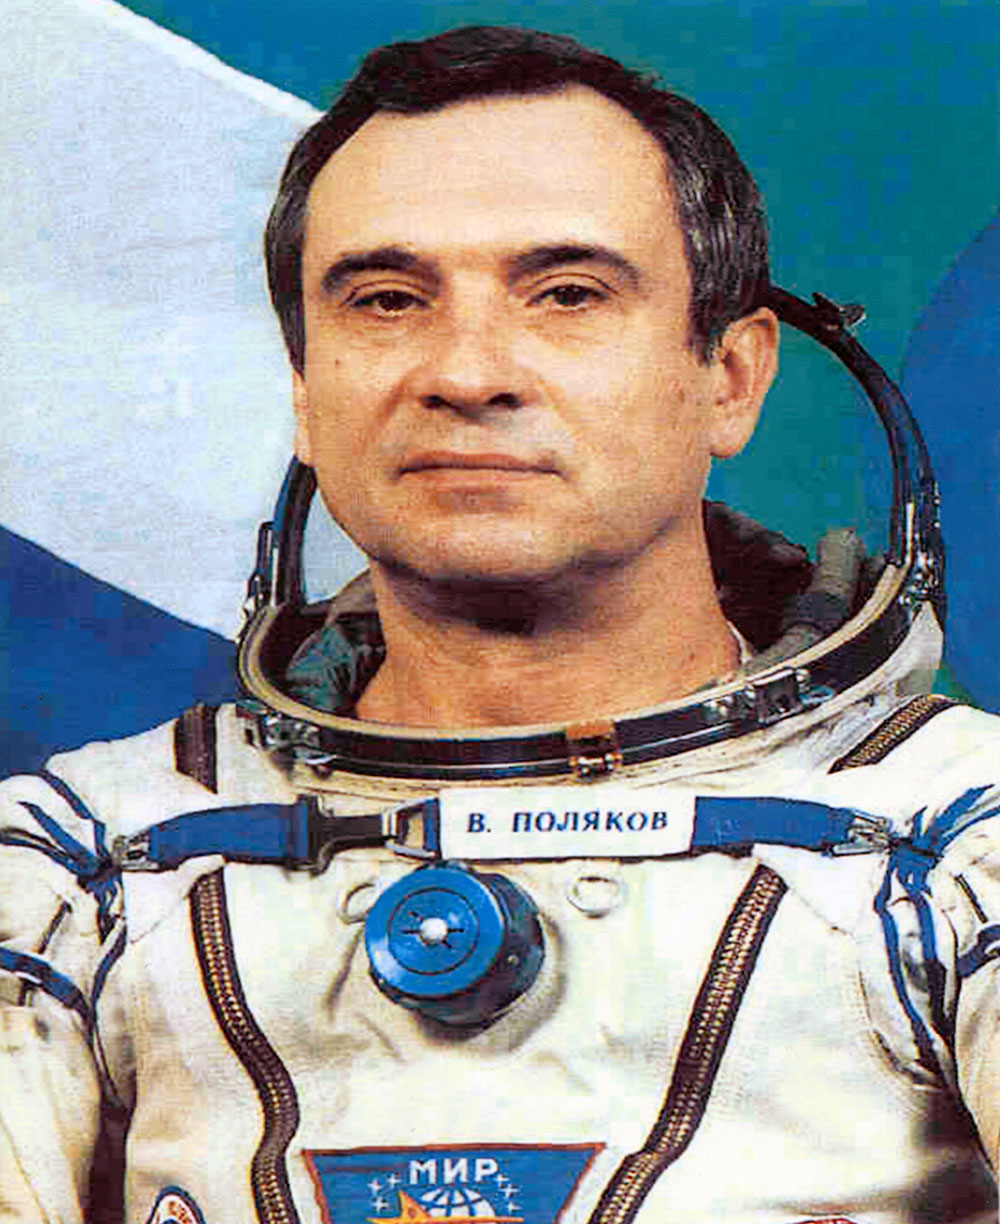 Valeri Polyakov was a cosmonaut from March 1972 until June 1995. He has remained active in space medicine. Credit: New Mexico Museum of Space History